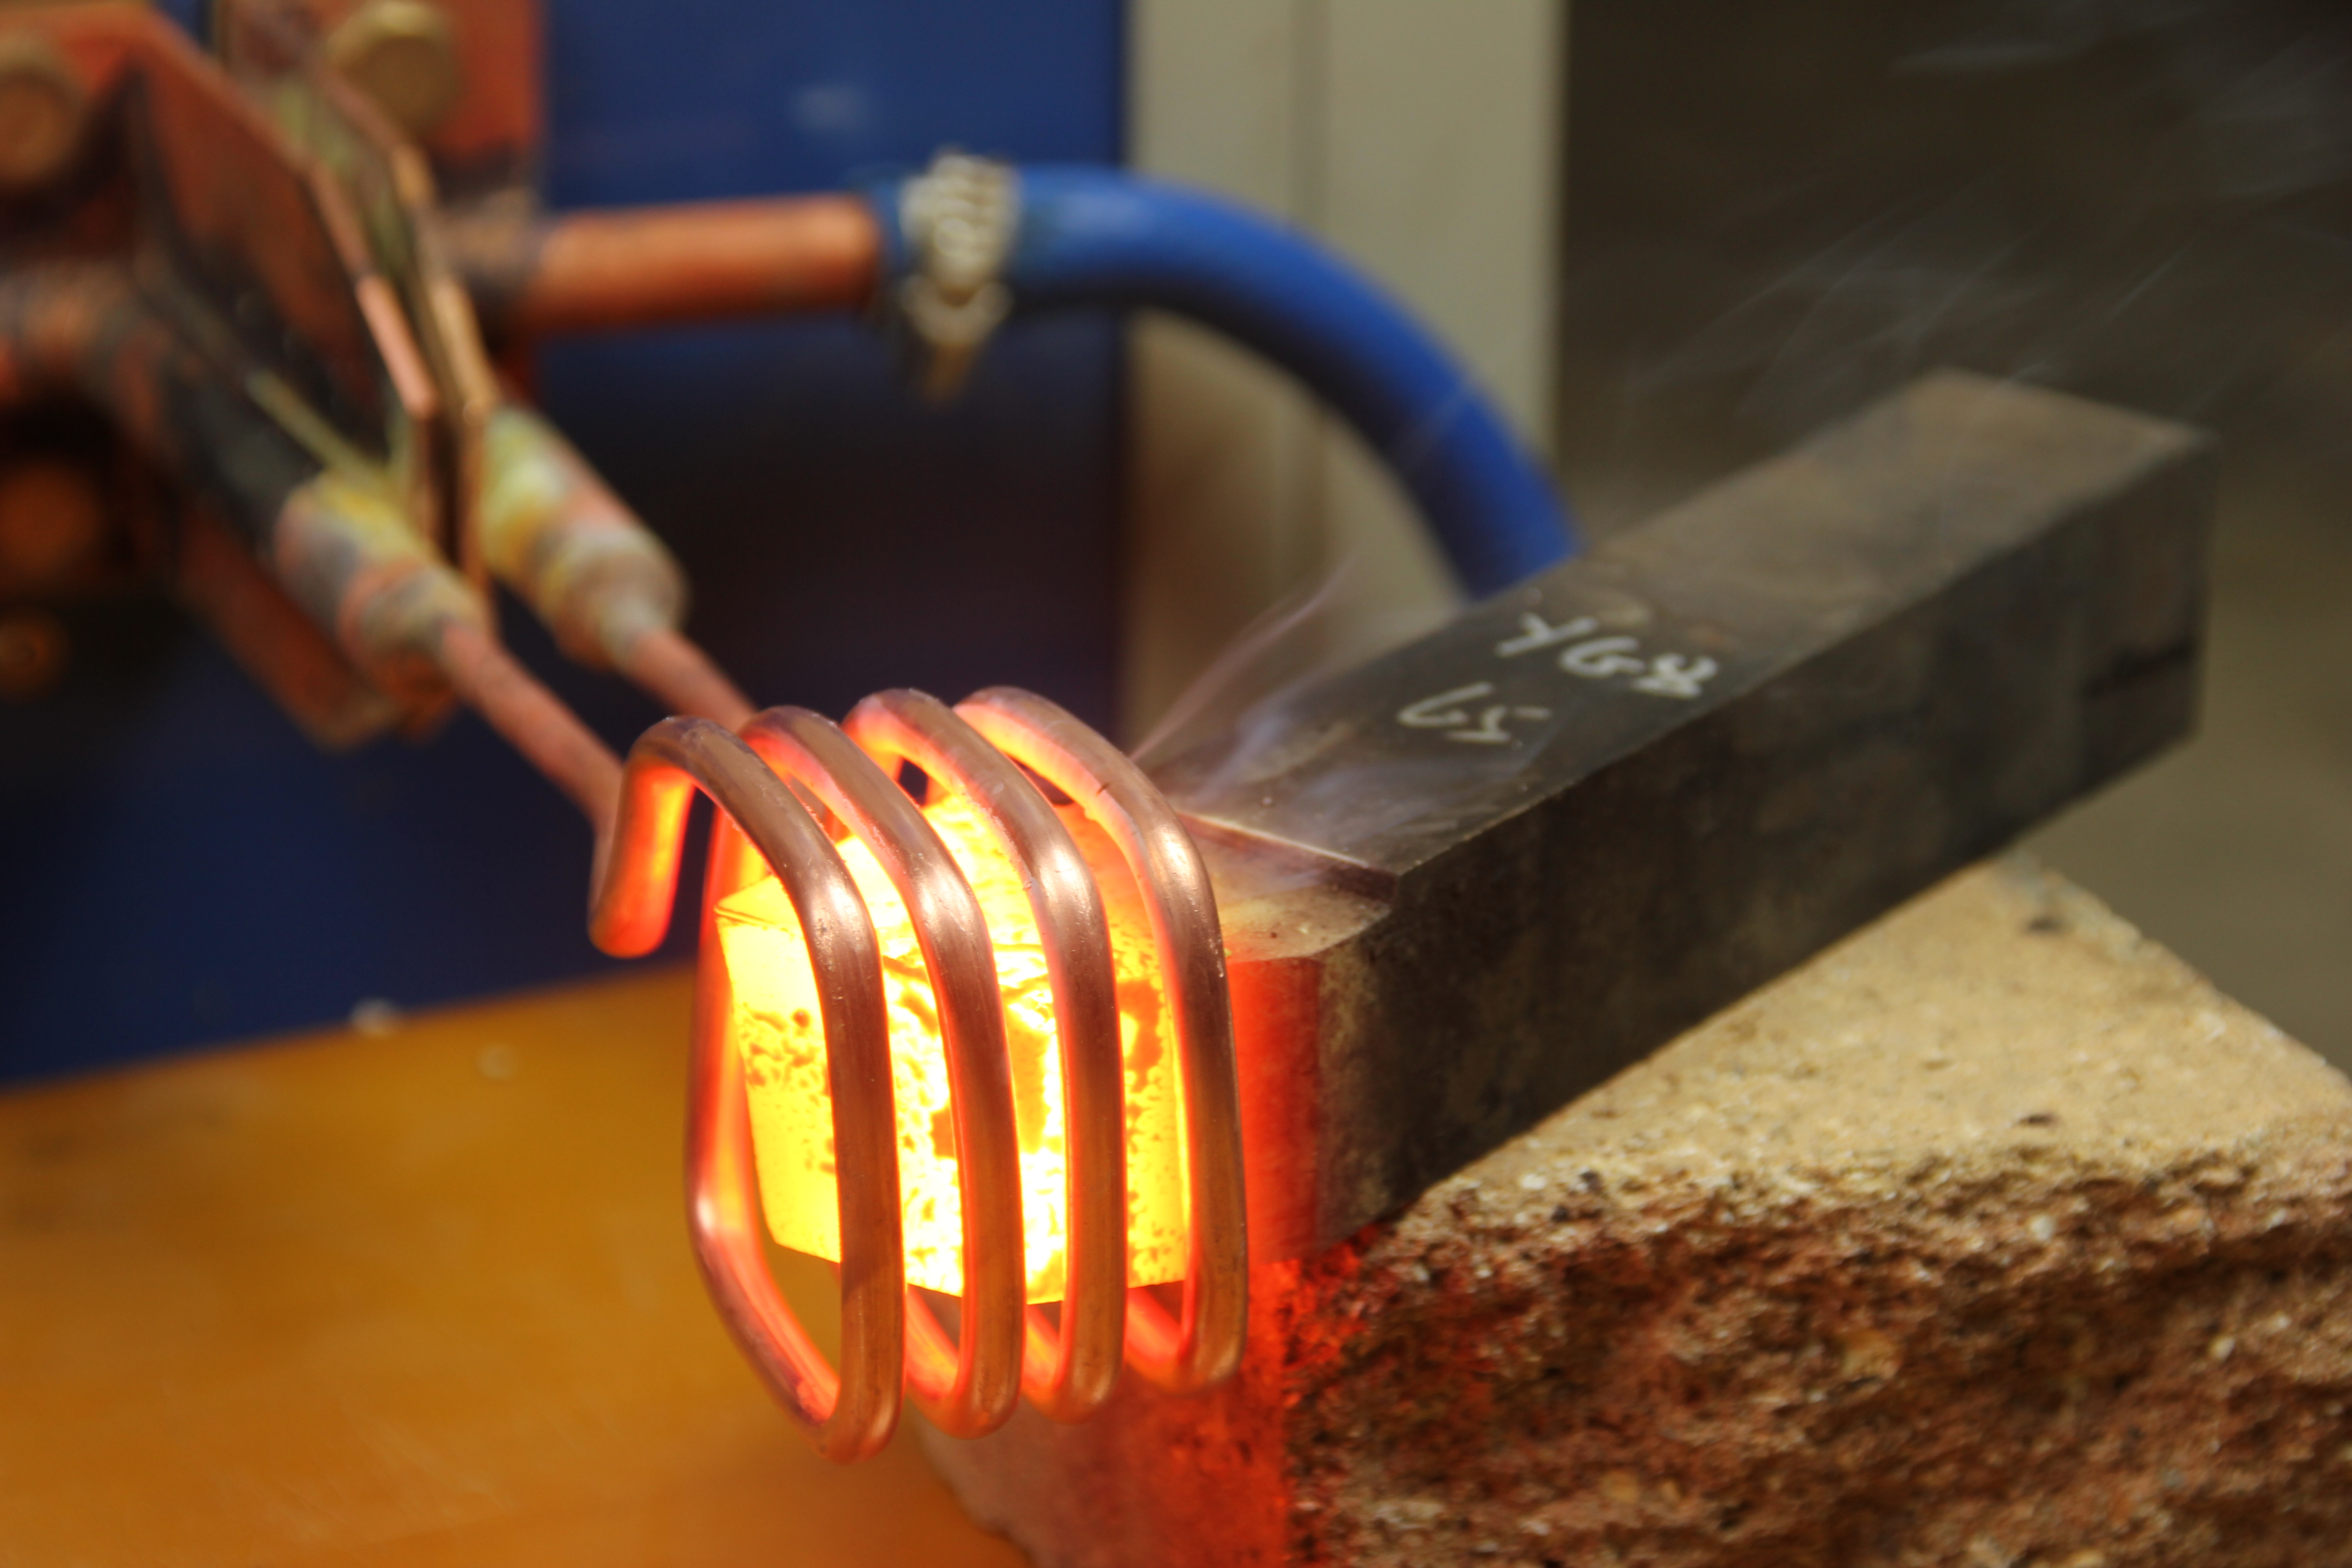 Induction Heating Machines In Oil And Gas